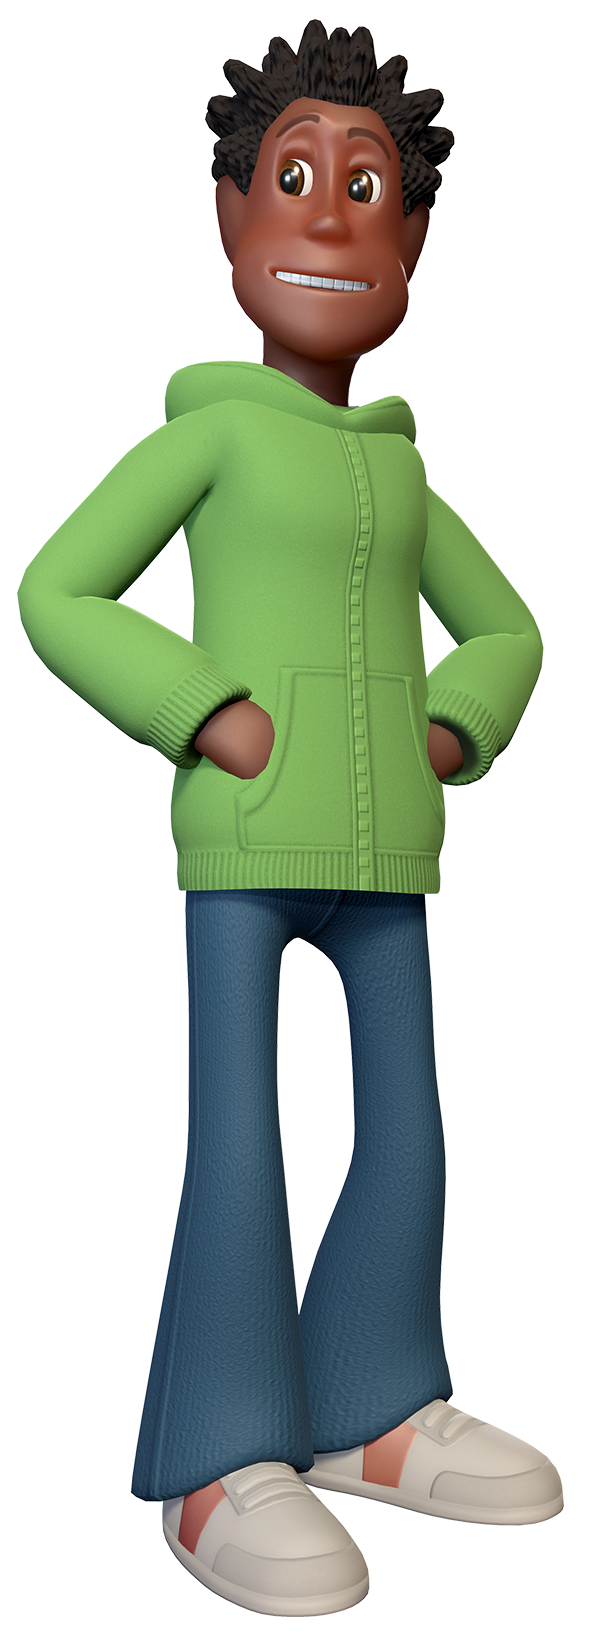 TPC_CHARACTER_GENERIC-STUDENT-small.png